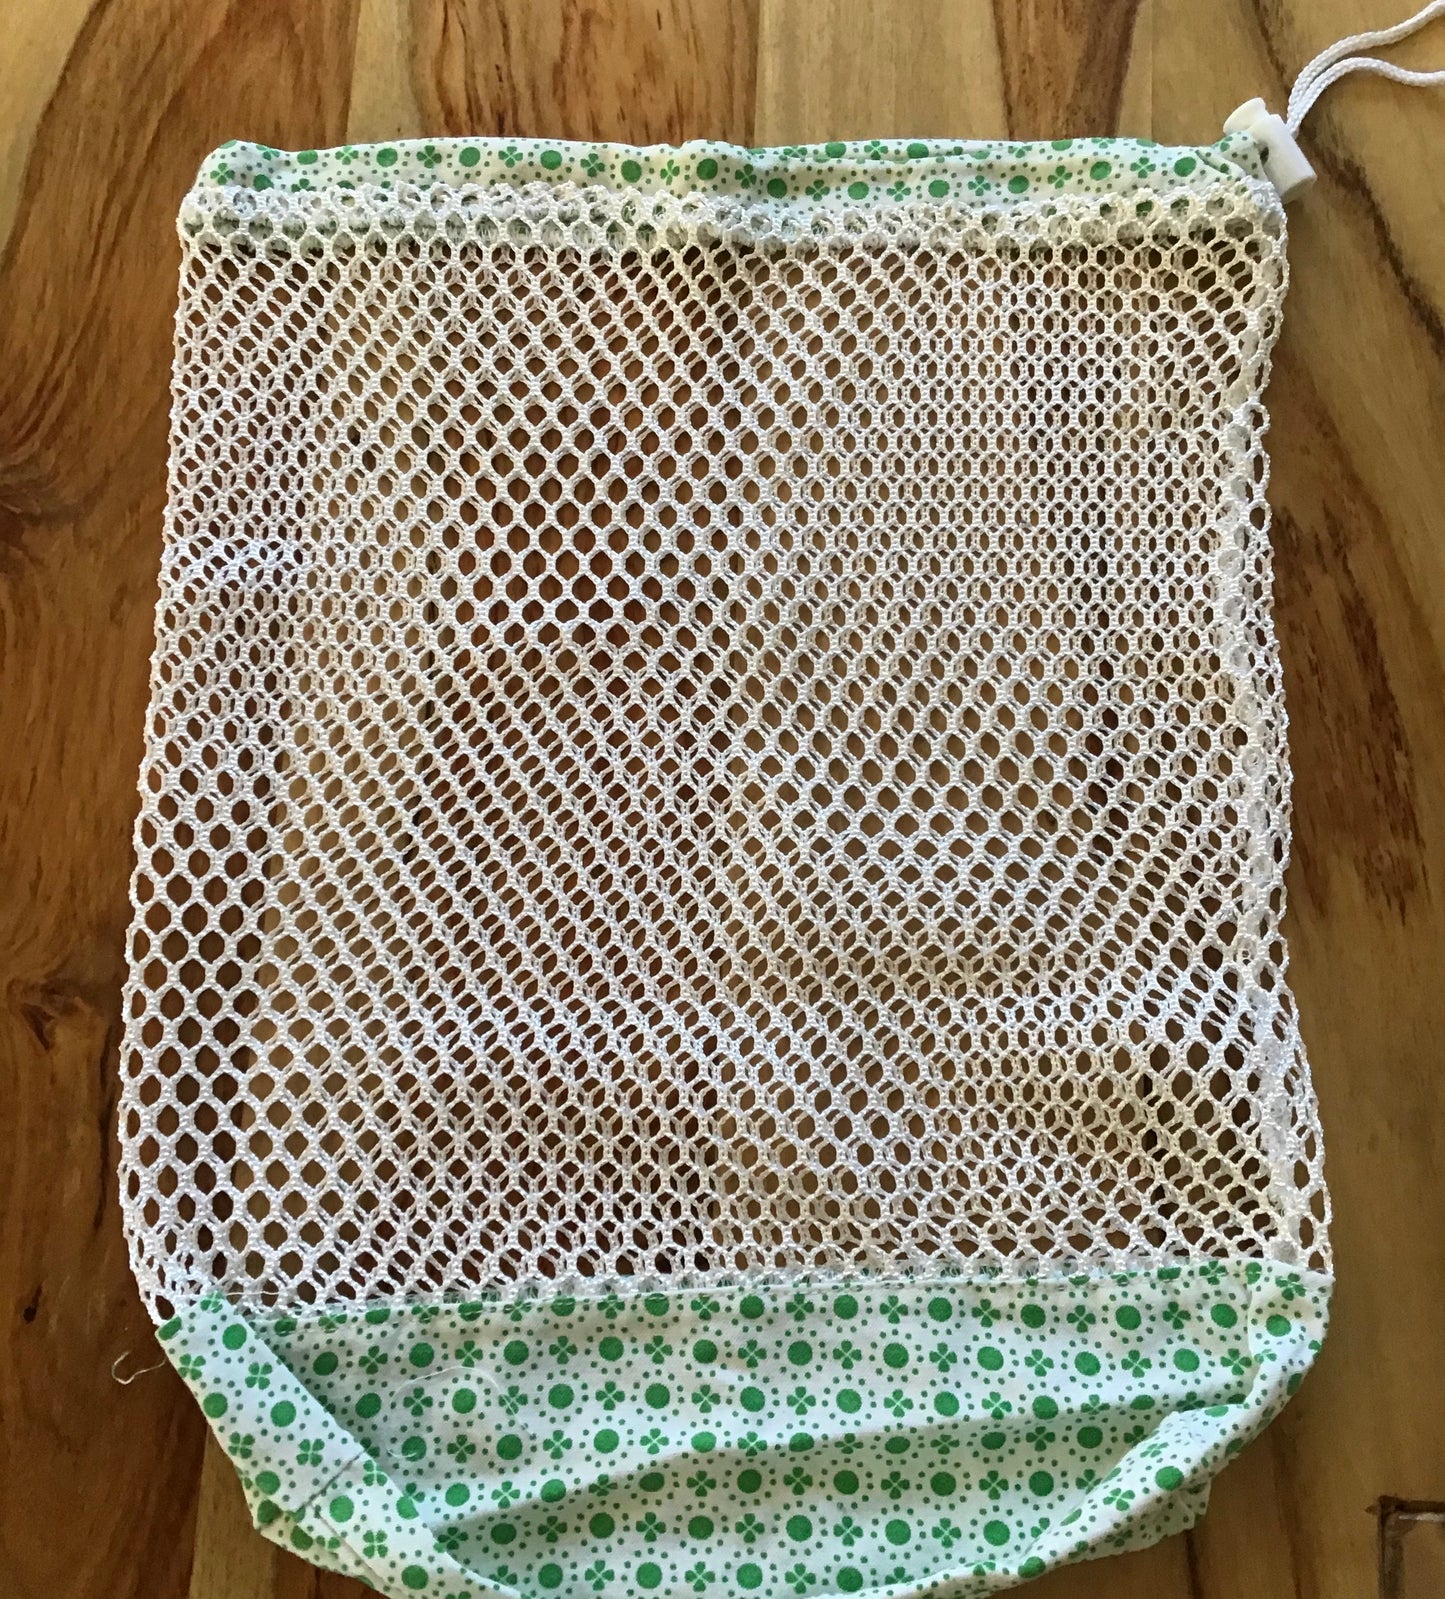 Bag for fruits and vegetables (two bags with case)